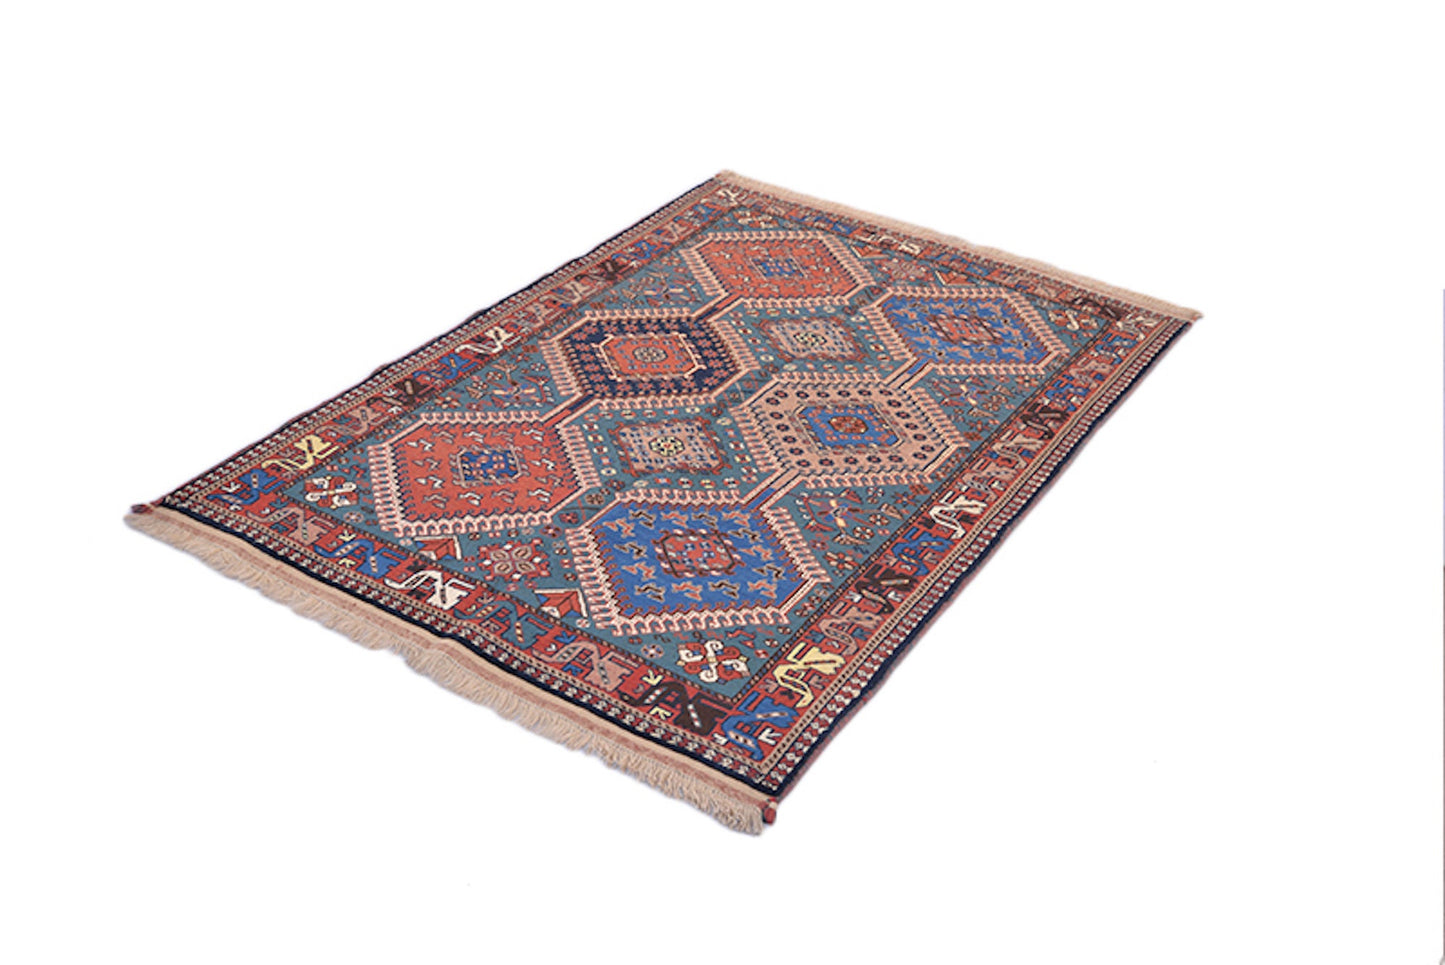 Rustic Tribal 3x5 Vintage Hand Knotted Pink and Blue Rug | Diamond Pattern with Oriental Details | Navy Border made of Wool